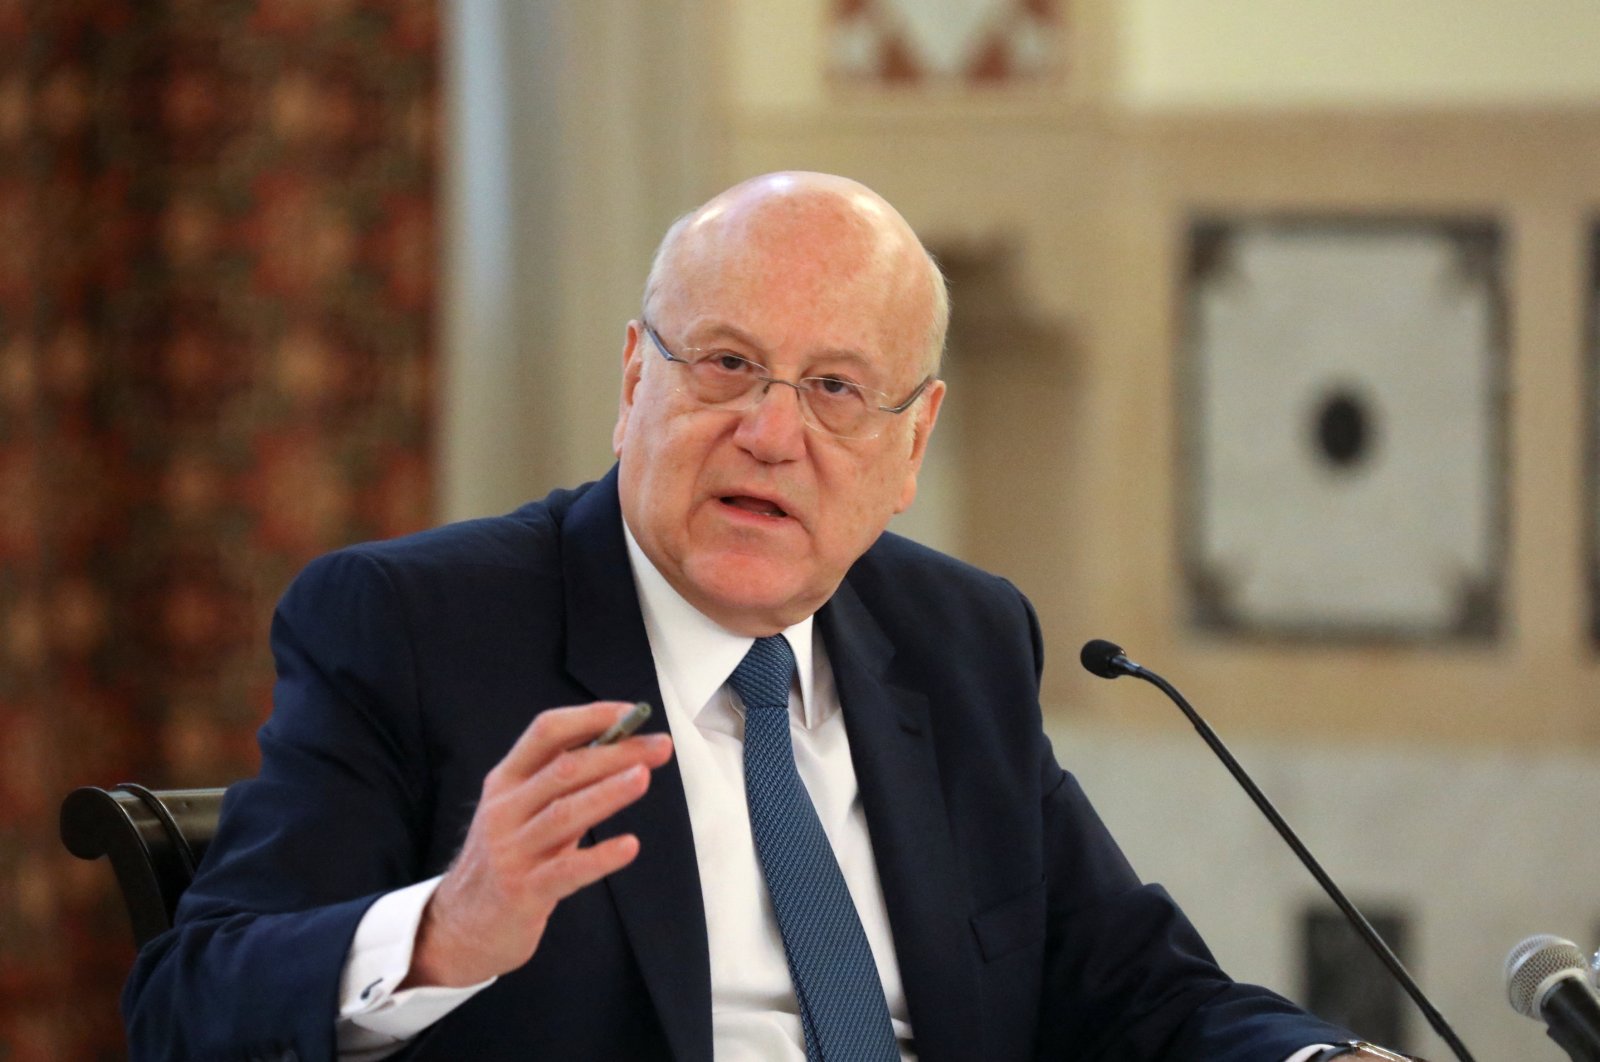 Lebanese Prime Minister Najib Mikati gestures during a news conference on the latest developments in the country, at the governmental palace in Beirut, Lebanon, Dec. 28, 2021. (Reuters File Photo)